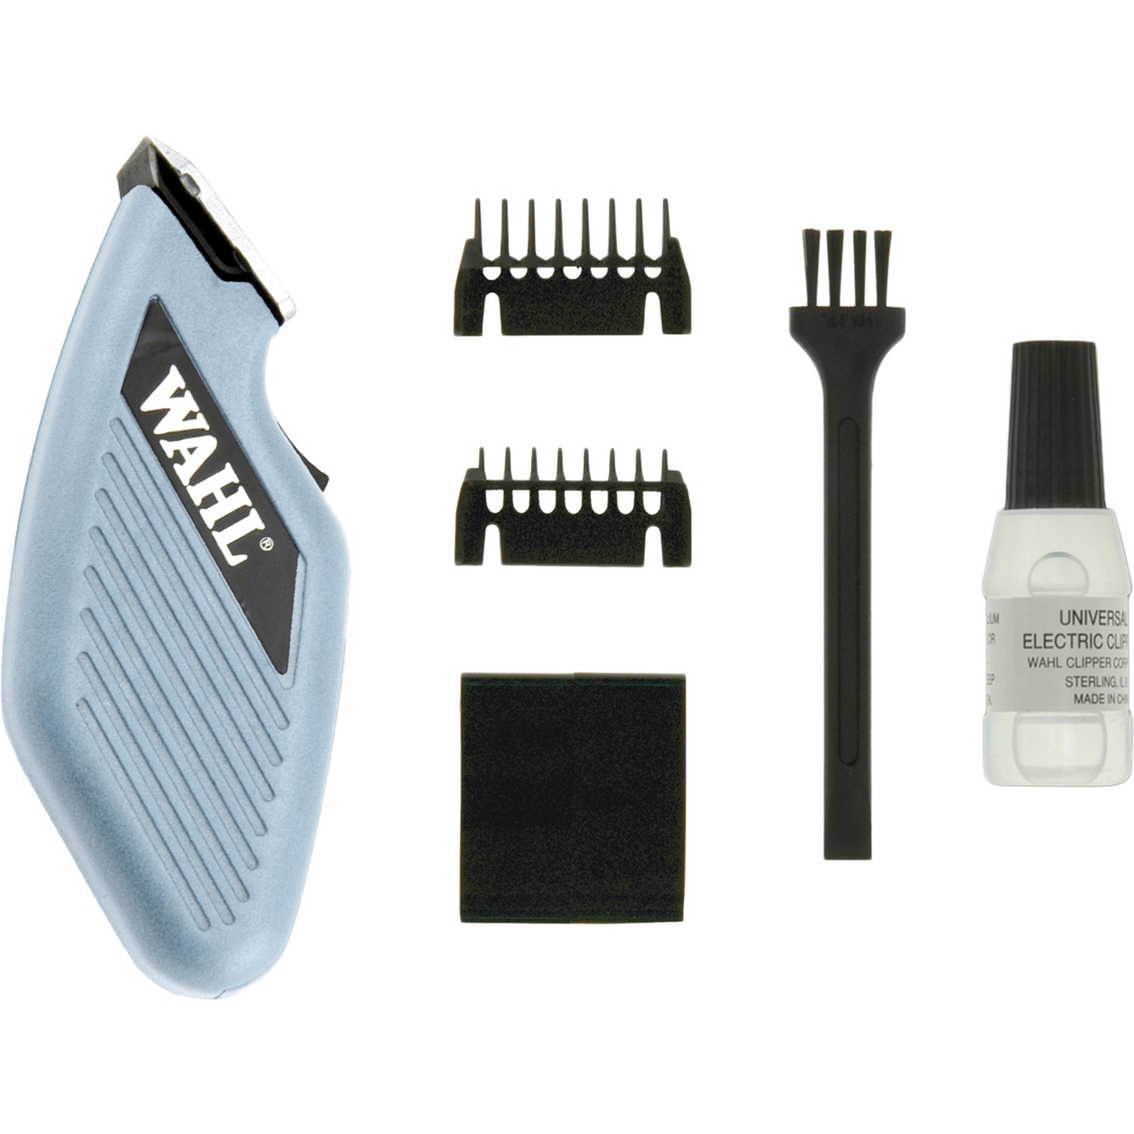 Wahl Pocket Pro Pet Clippers - Image 3 of 3